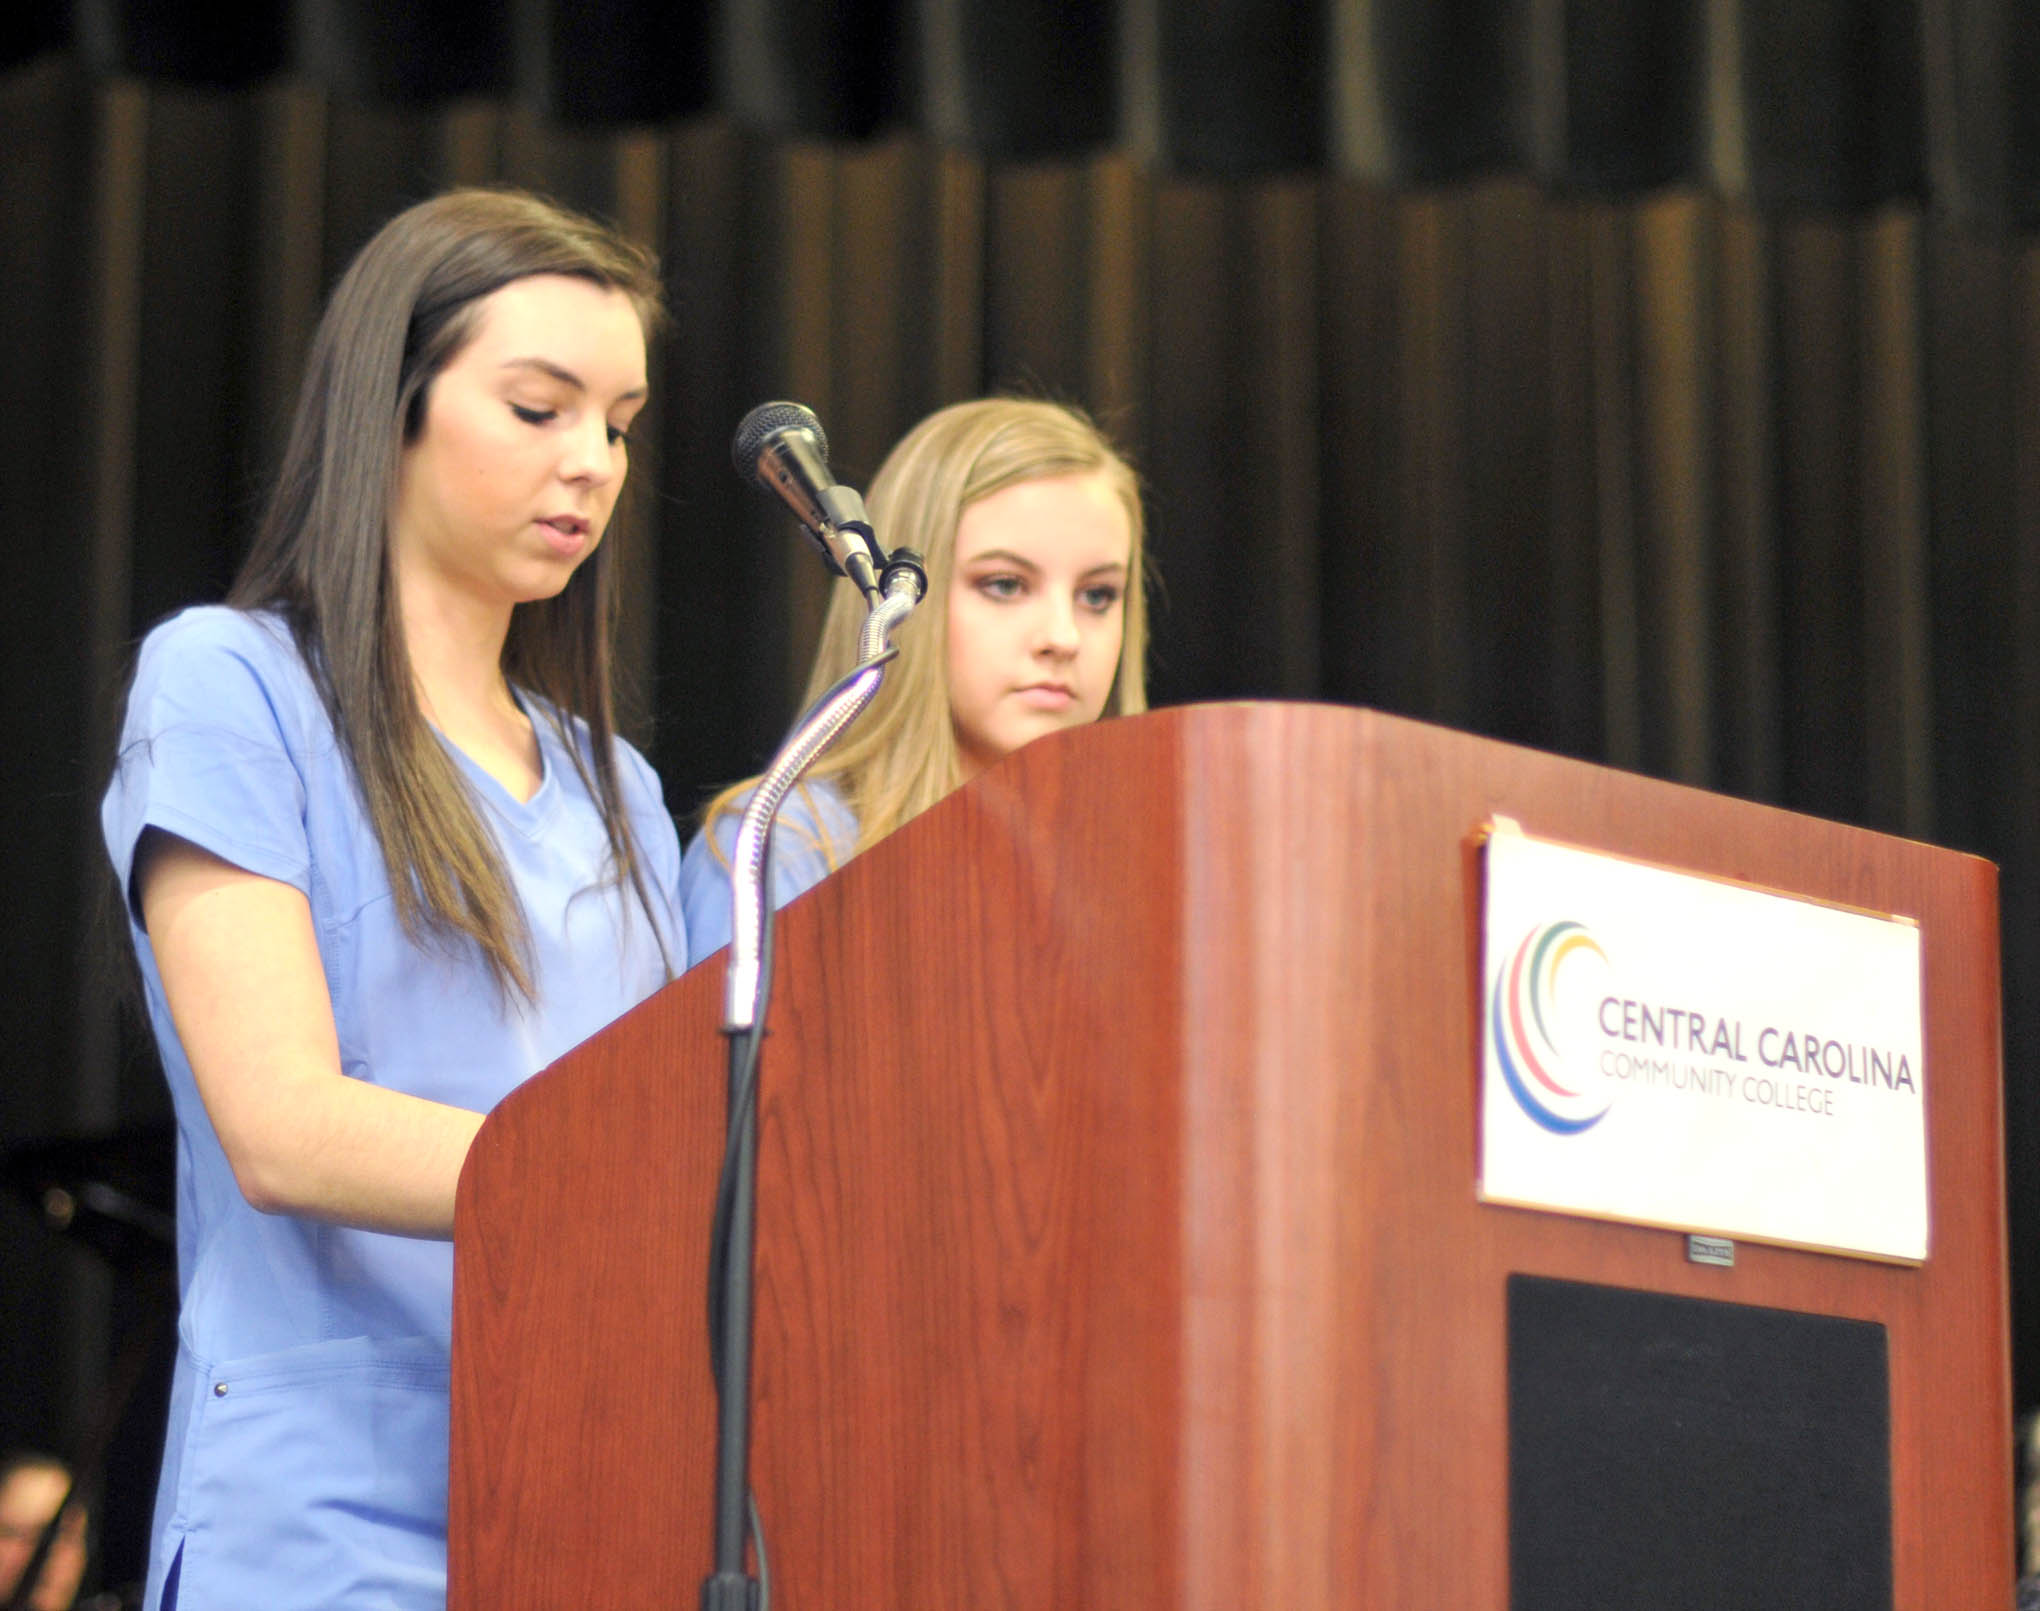 More than 450 graduate from CCCC's Economic and Community Development Continuing Education Medical Programs